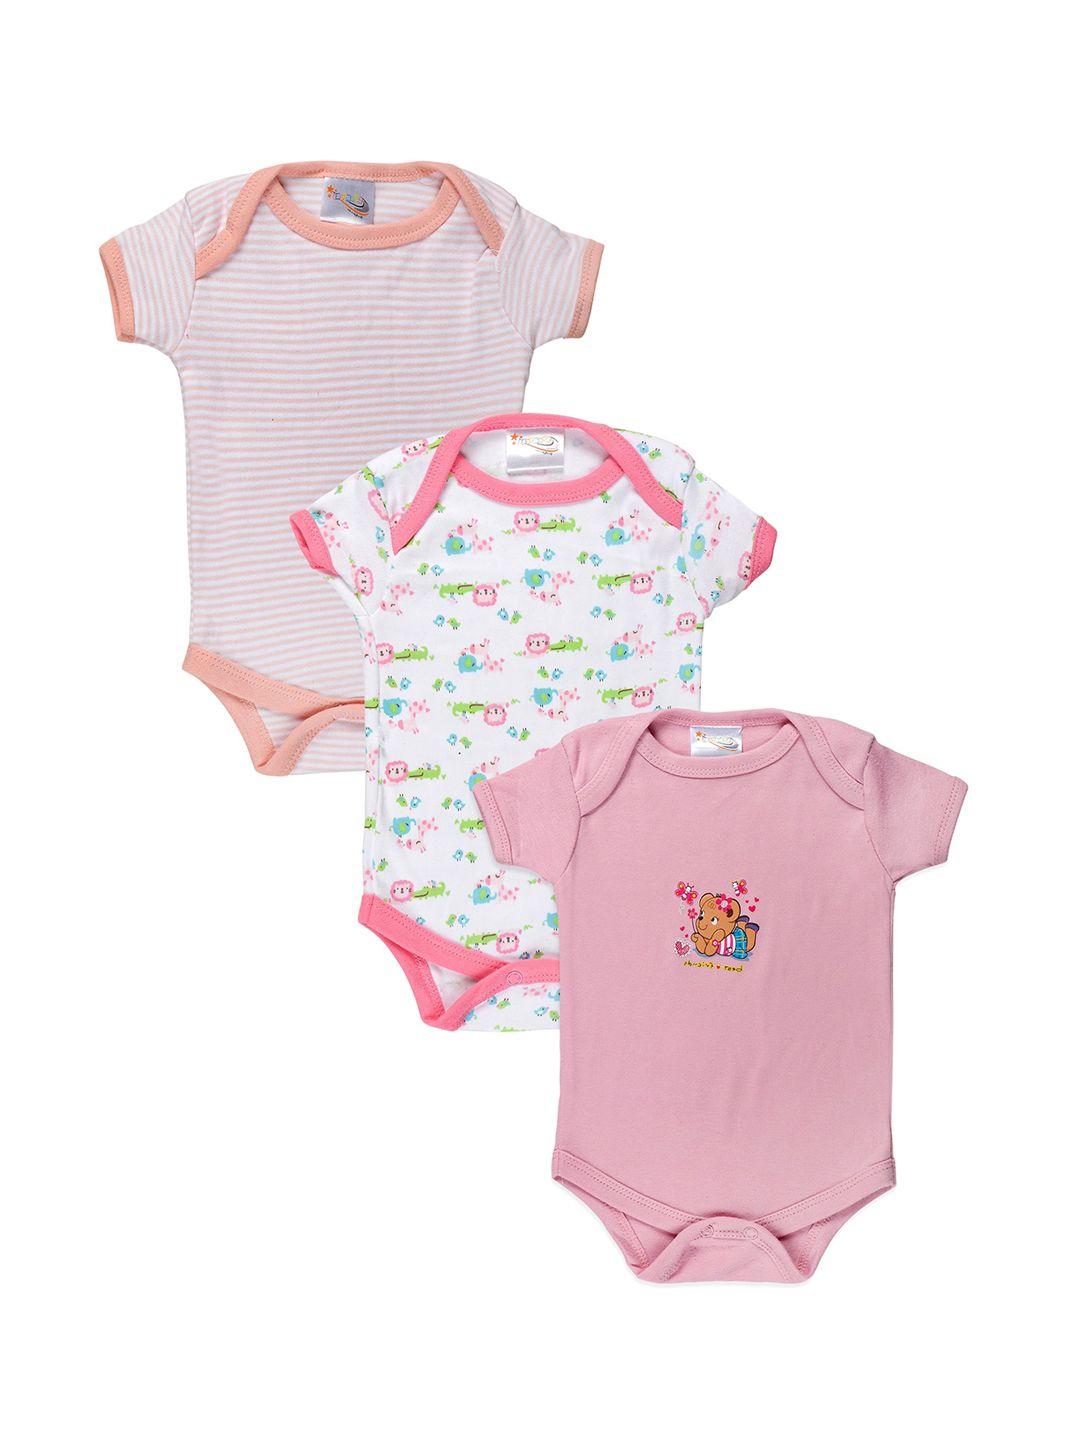 starters-kids-set-of-3-printed-cotton-rompers